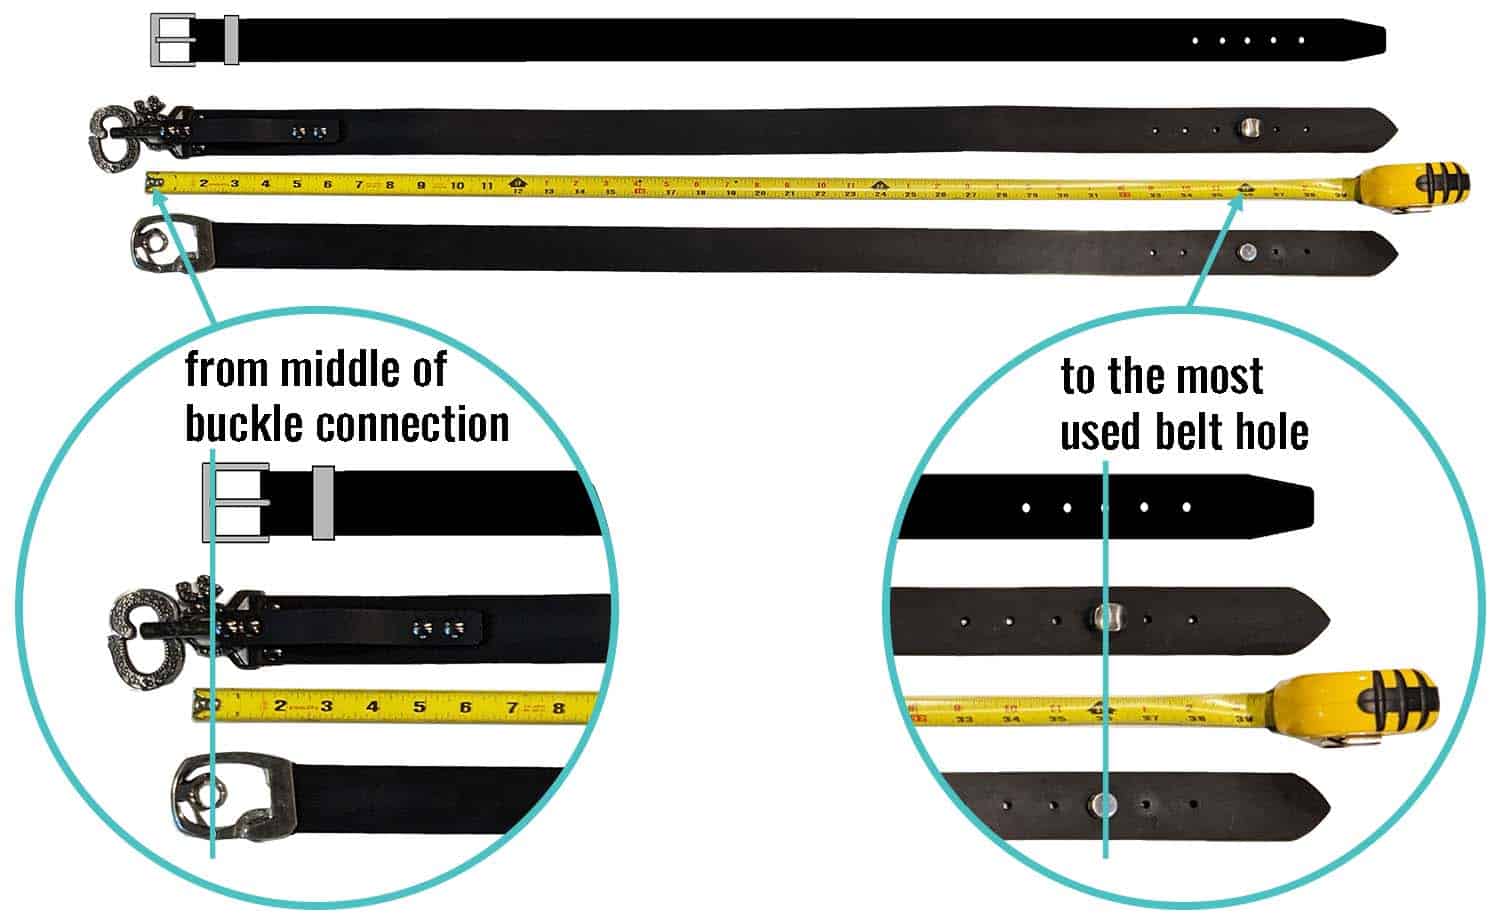 How to Measure for a Belt to Find Your Perfect Size – Obscure Belts